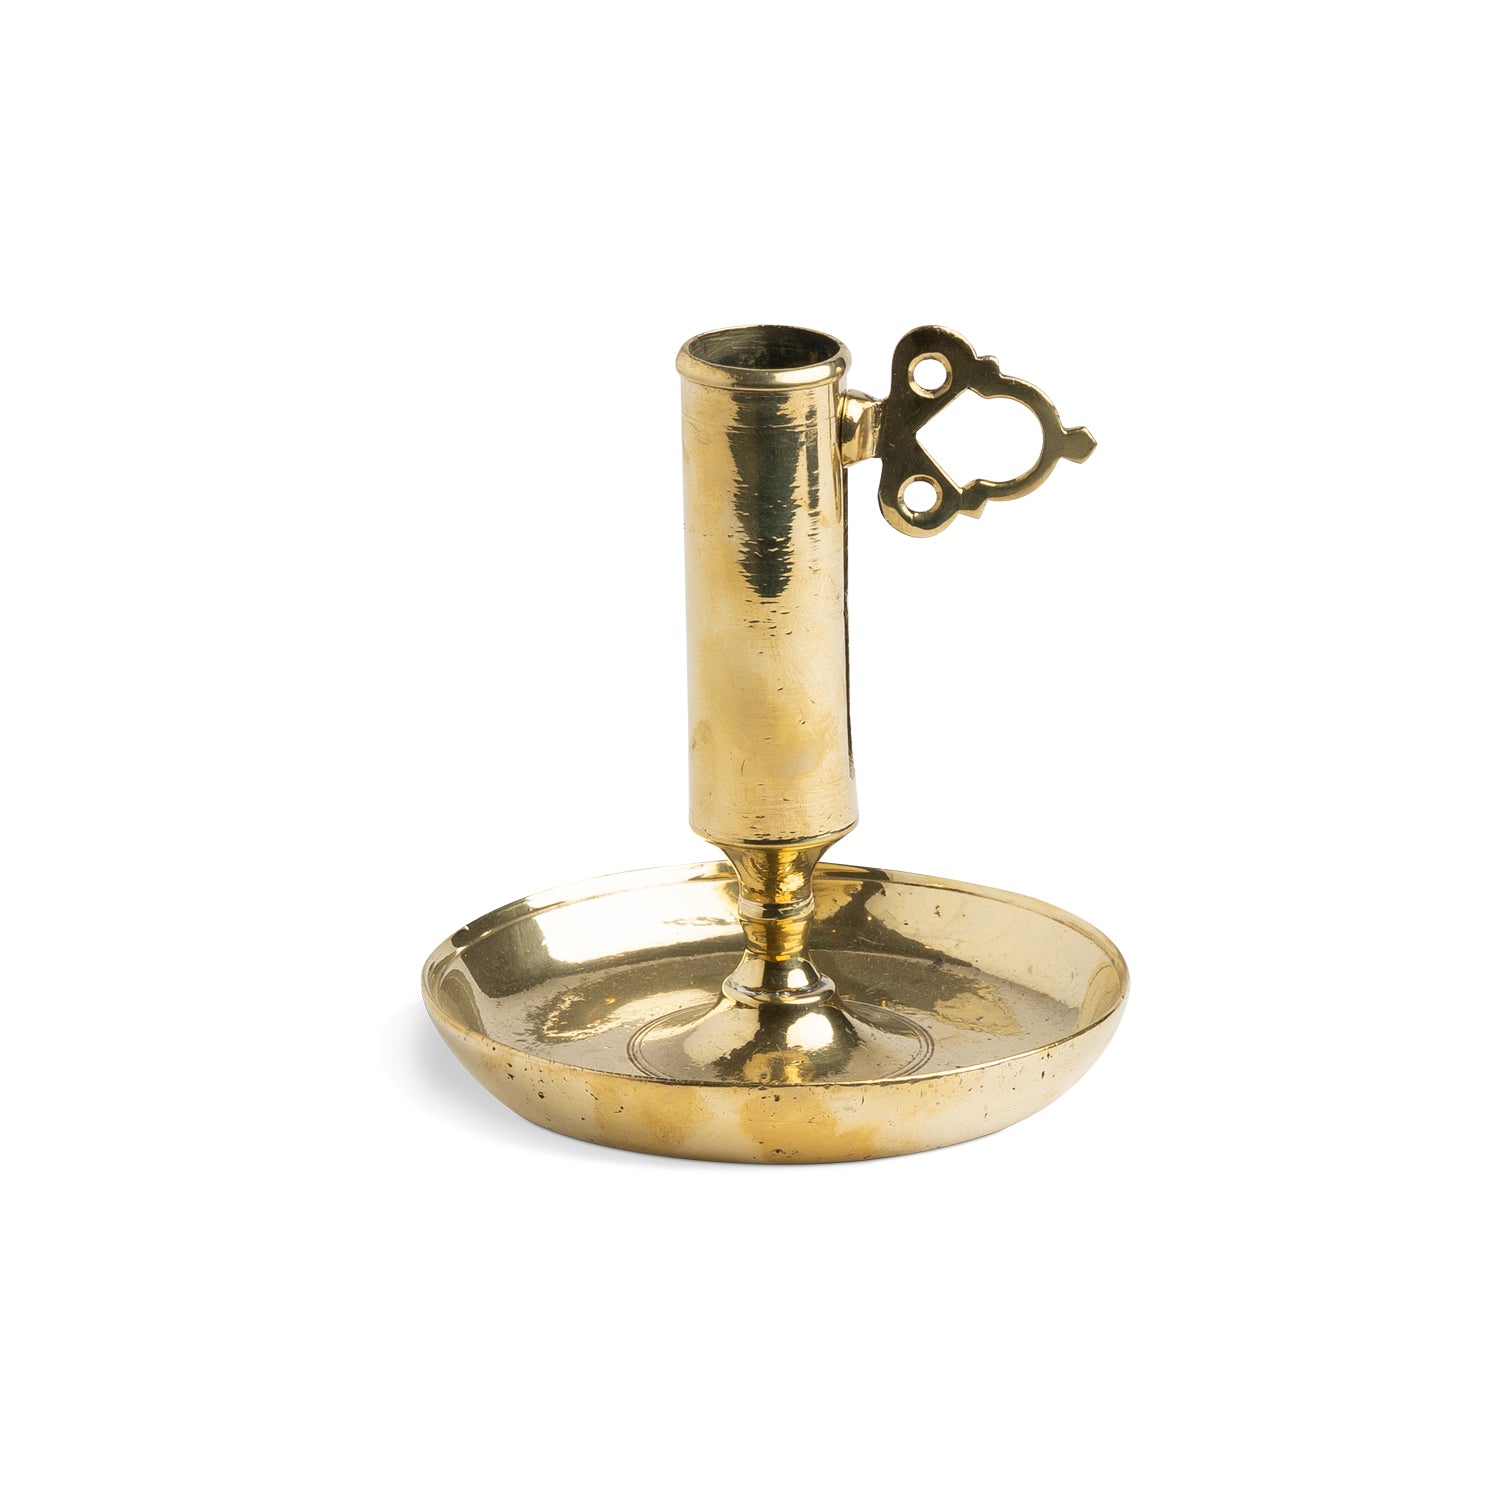 Swedish Brass Candlestick with Movable Handle, early 20th c